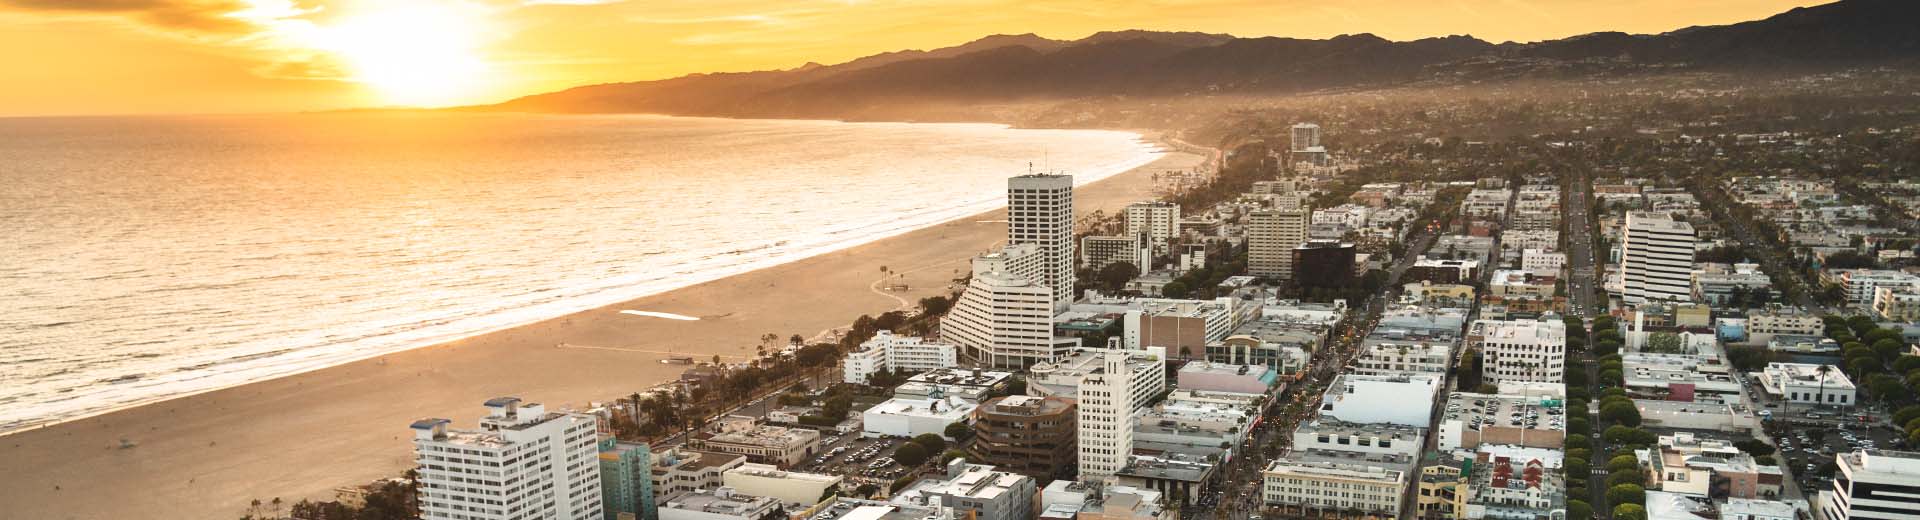 Beautiful Santa Monica during dusk or dawn, with the Pacific Ocean gently lapping the shore.